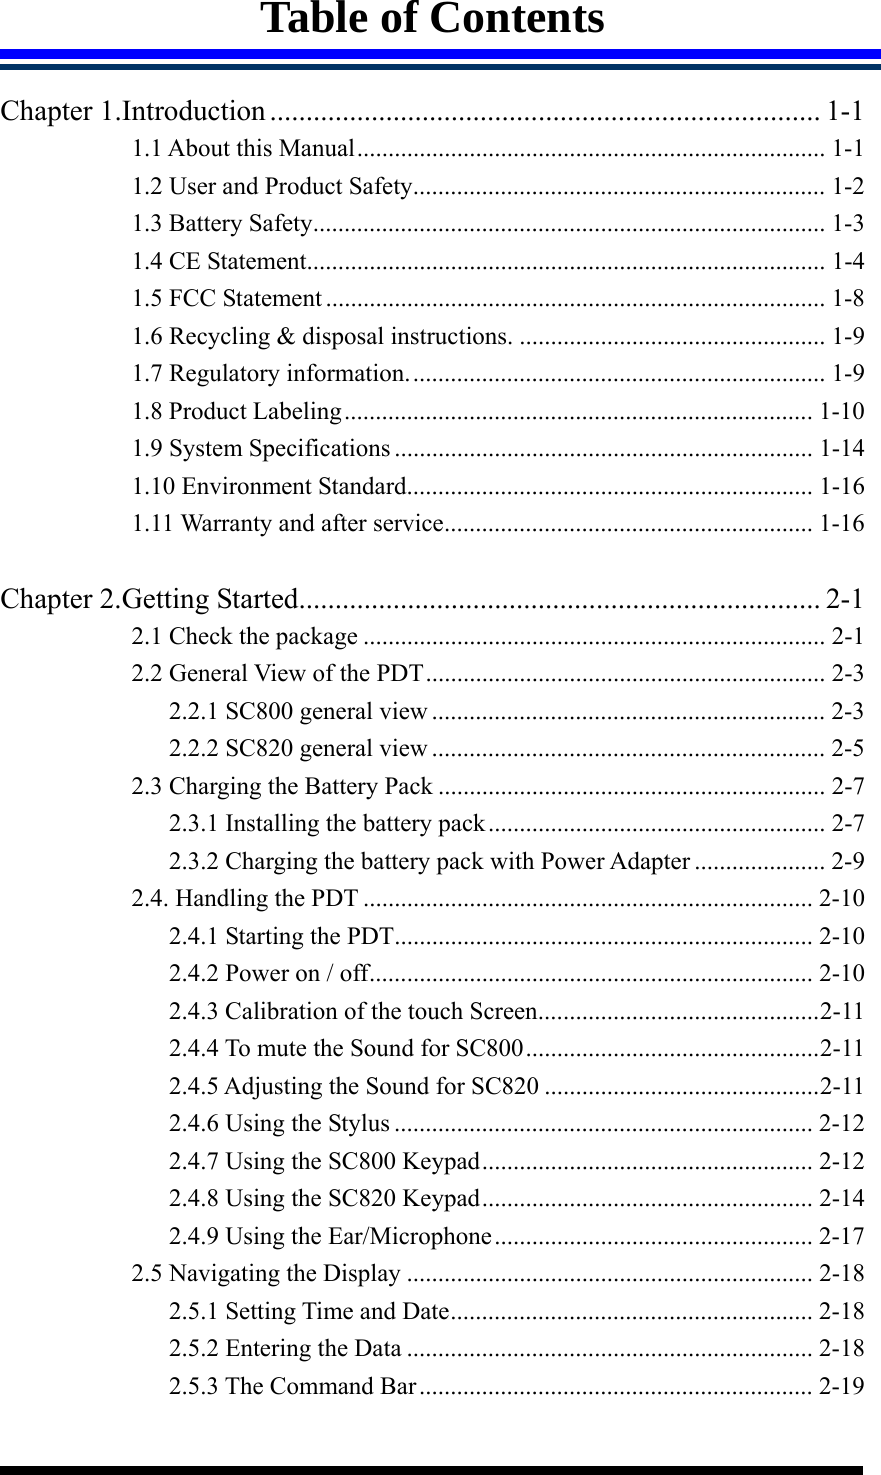  Table of Contents  Chapter 1.Introduction............................................................................ 1-1 1.1 About this Manual........................................................................... 1-1 1.2 User and Product Safety.................................................................. 1-2 1.3 Battery Safety.................................................................................. 1-3 1.4 CE Statement................................................................................... 1-4 1.5 FCC Statement ................................................................................ 1-8 1.6 Recycling &amp; disposal instructions. ................................................. 1-9 1.7 Regulatory information................................................................... 1-9 1.8 Product Labeling........................................................................... 1-10 1.9 System Specifications ................................................................... 1-14 1.10 Environment Standard................................................................. 1-16 1.11 Warranty and after service........................................................... 1-16  Chapter 2.Getting Started........................................................................ 2-1 2.1 Check the package .......................................................................... 2-1 2.2 General View of the PDT................................................................ 2-3 2.2.1 SC800 general view ............................................................... 2-3 2.2.2 SC820 general view ............................................................... 2-5 2.3 Charging the Battery Pack .............................................................. 2-7 2.3.1 Installing the battery pack...................................................... 2-7 2.3.2 Charging the battery pack with Power Adapter ..................... 2-9 2.4. Handling the PDT ........................................................................ 2-10 2.4.1 Starting the PDT................................................................... 2-10 2.4.2 Power on / off....................................................................... 2-10 2.4.3 Calibration of the touch Screen.............................................2-11 2.4.4 To mute the Sound for SC800...............................................2-11 2.4.5 Adjusting the Sound for SC820 ............................................2-11 2.4.6 Using the Stylus ................................................................... 2-12 2.4.7 Using the SC800 Keypad..................................................... 2-12 2.4.8 Using the SC820 Keypad..................................................... 2-14 2.4.9 Using the Ear/Microphone................................................... 2-17 2.5 Navigating the Display ................................................................. 2-18 2.5.1 Setting Time and Date.......................................................... 2-18 2.5.2 Entering the Data ................................................................. 2-18 2.5.3 The Command Bar............................................................... 2-19 